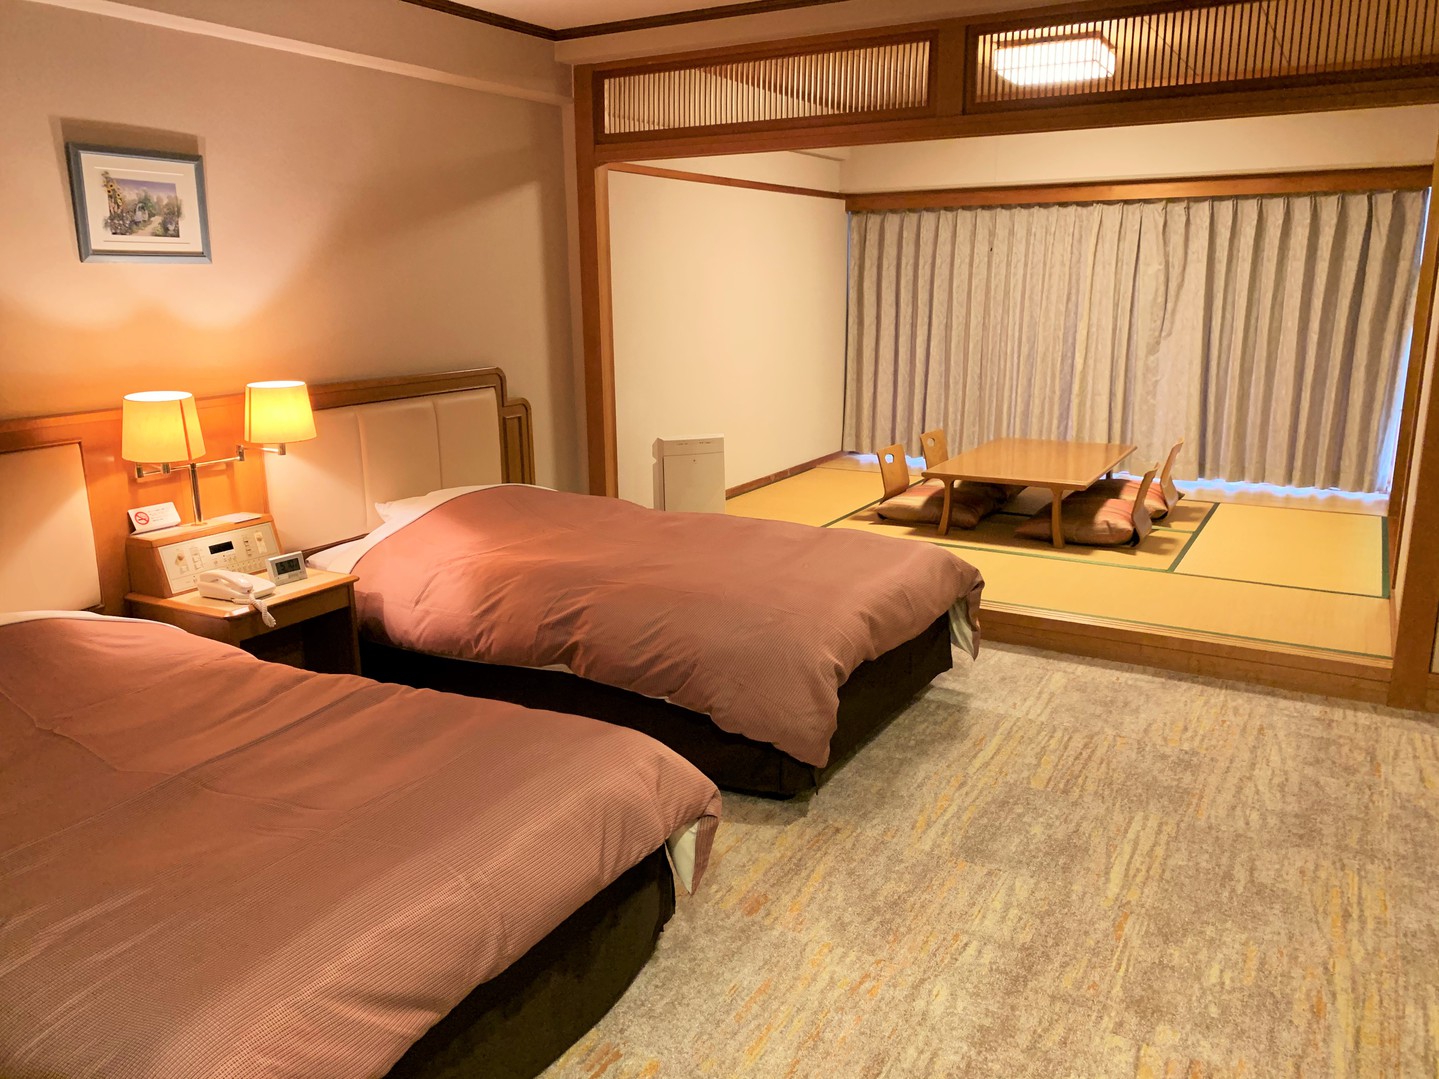 Daikoku Resort Hotel Daikoku Resort Hotel is conveniently located in the popular Shibushi area. Offering a variety of facilities and services, the property provides all you need for a good nights sleep. To be found at th